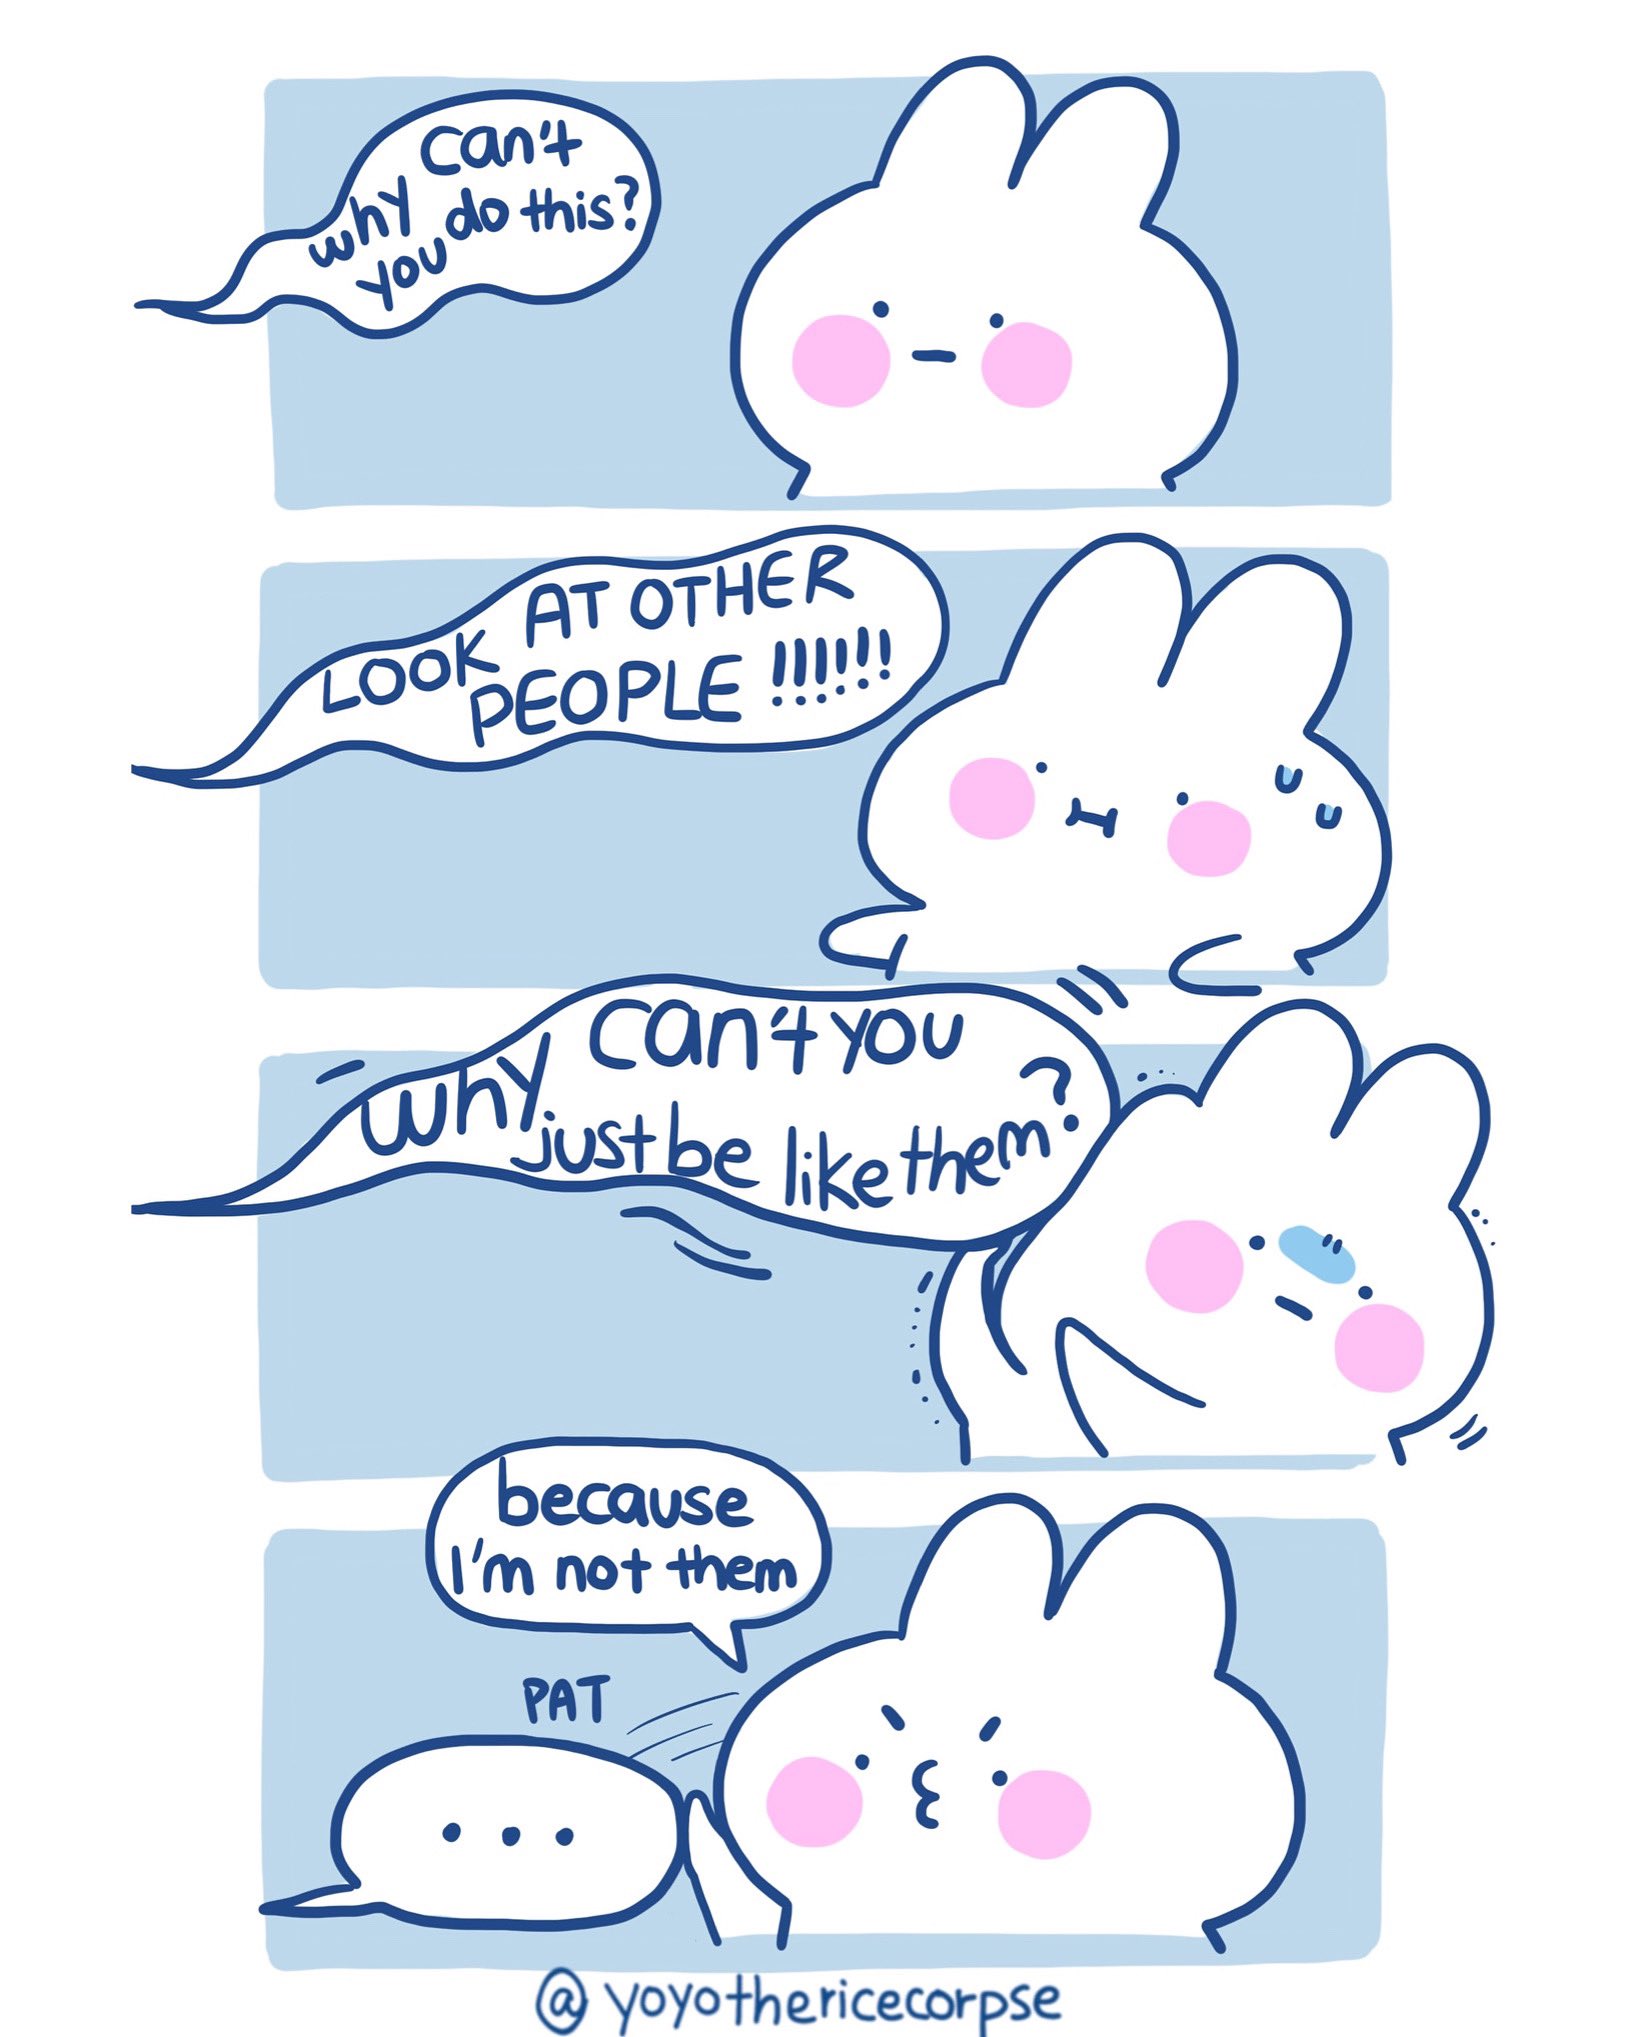 A bunny getting stressed and trying to get away from messages like "why can't you do this?" "Look at other people!!!!!!" "Why can't you just be like them?" The bunny gets angry, pats away a final speech bubble, and says "because I'm not them"